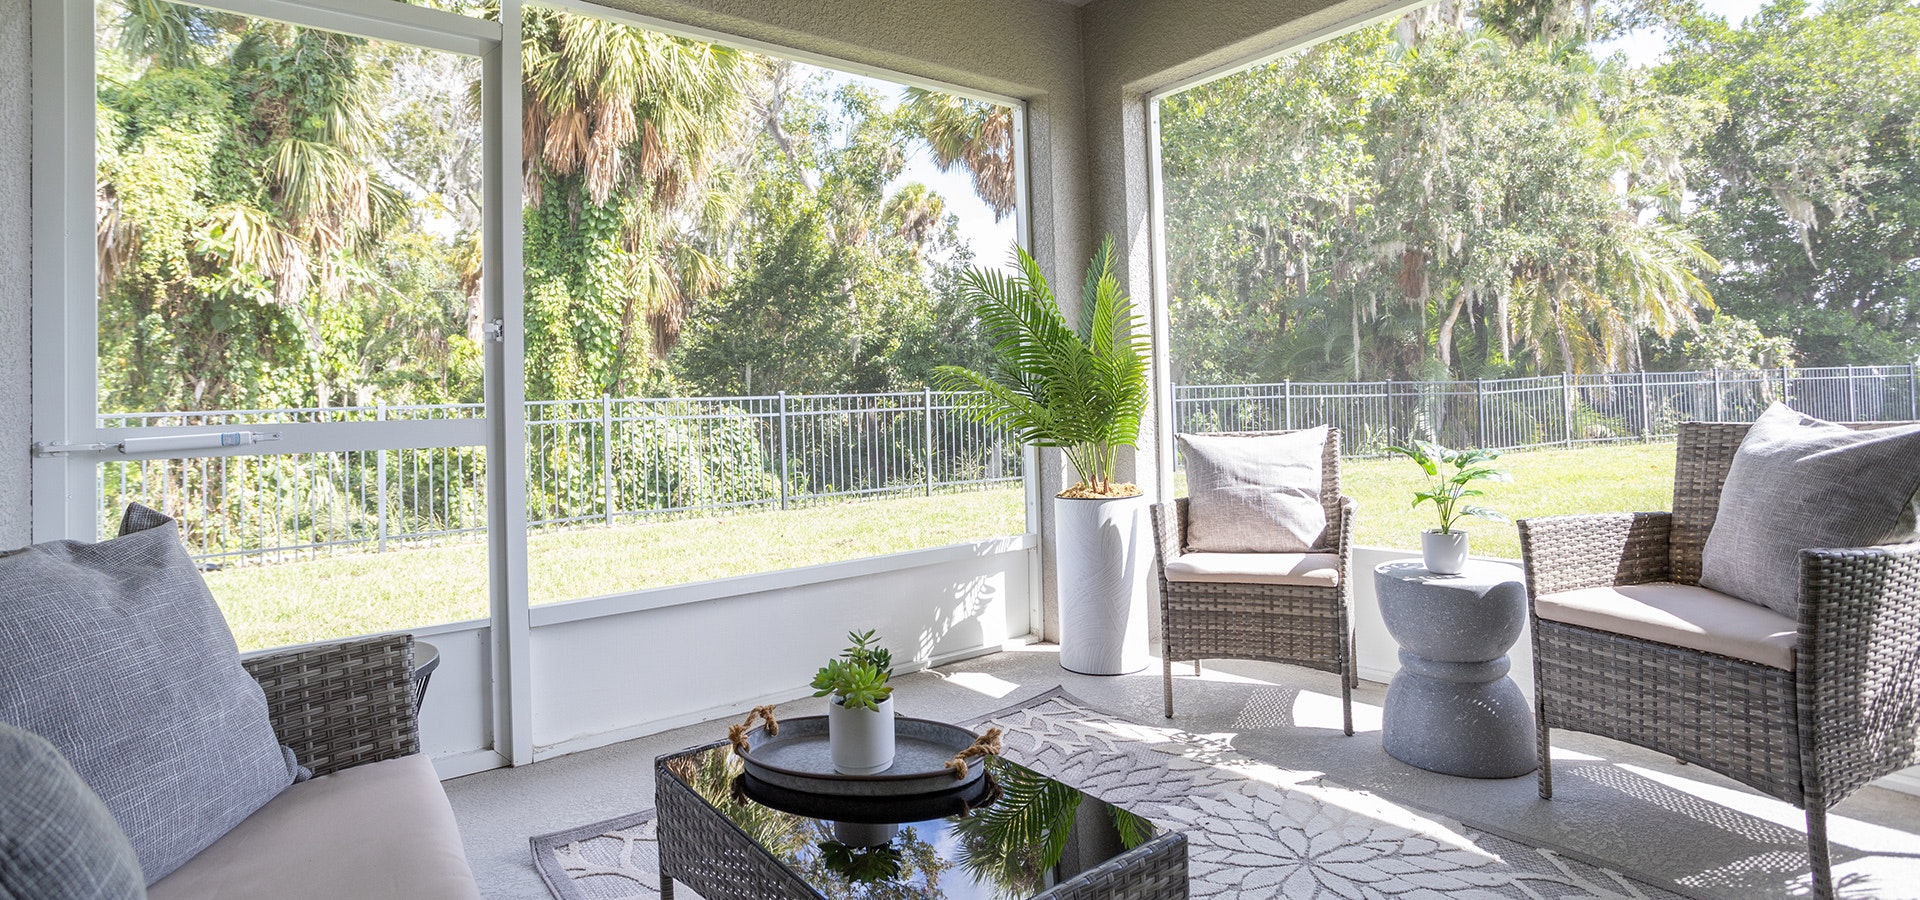 Outdoor living space included in Palmetto new homes at Jackson Crossing by Highland Homes